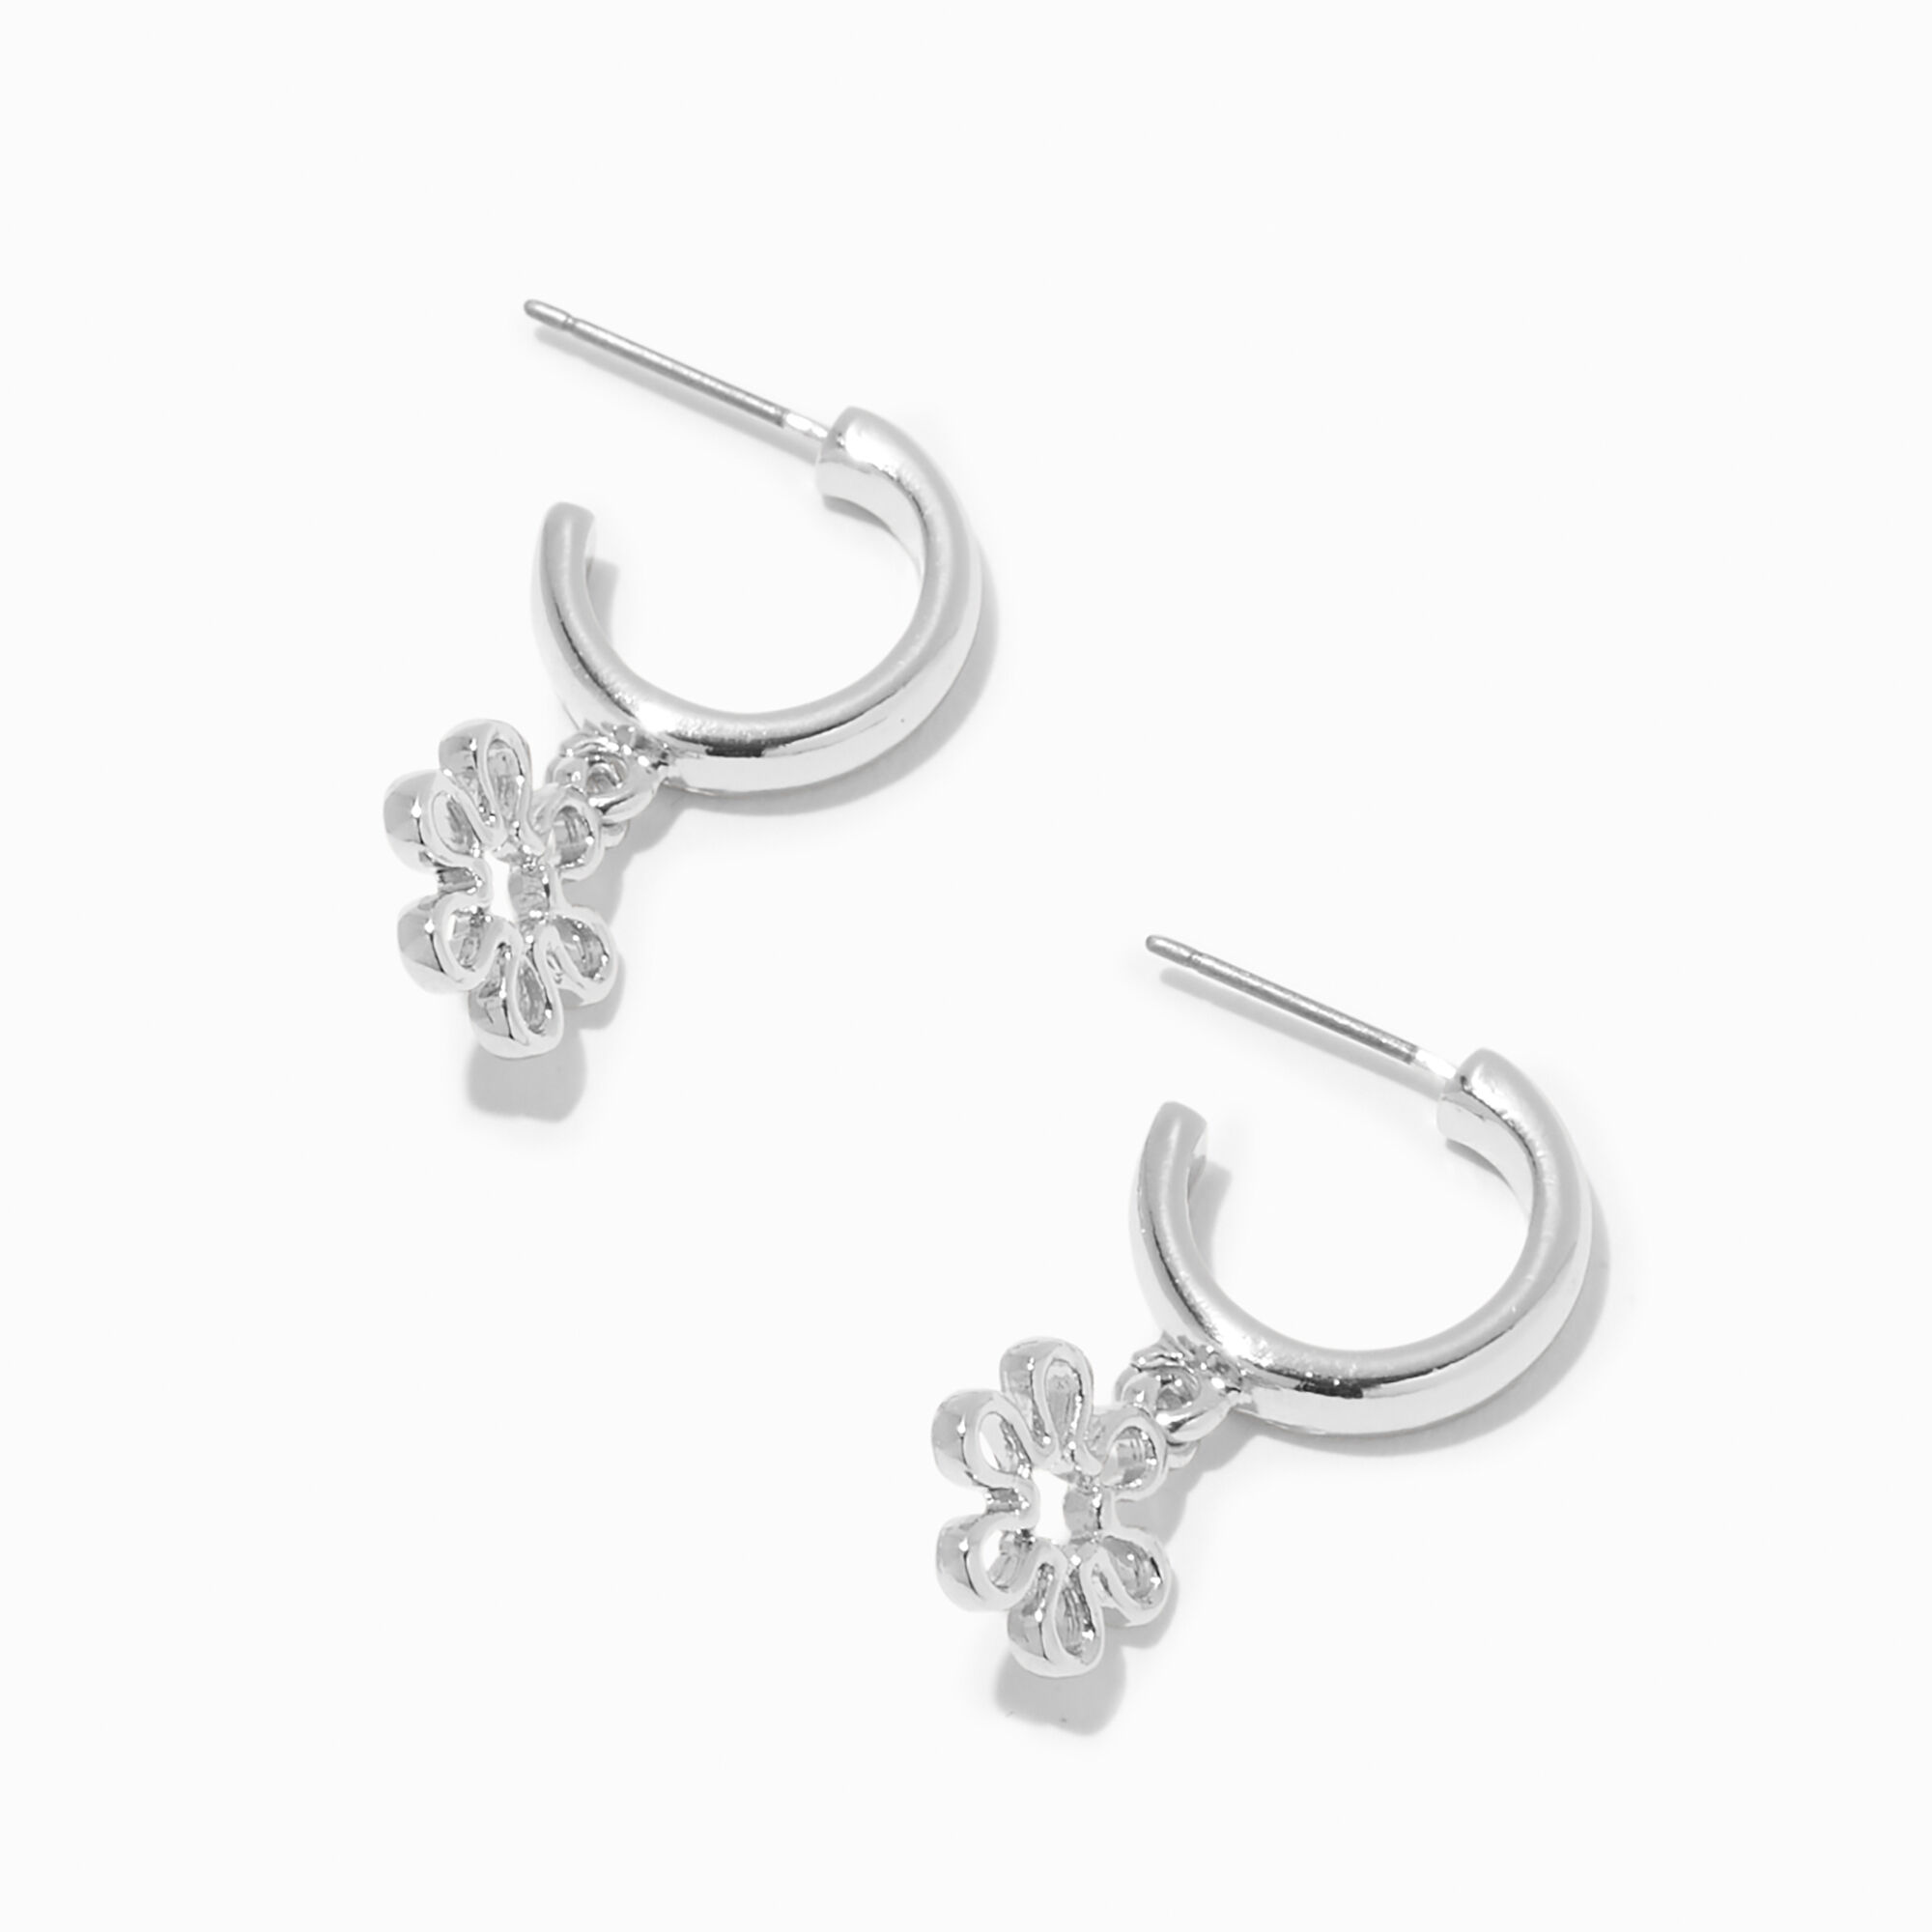 View Claires Recycled Jewelry Tone Daisy 10MM Huggie Hoop Earrings Silver information